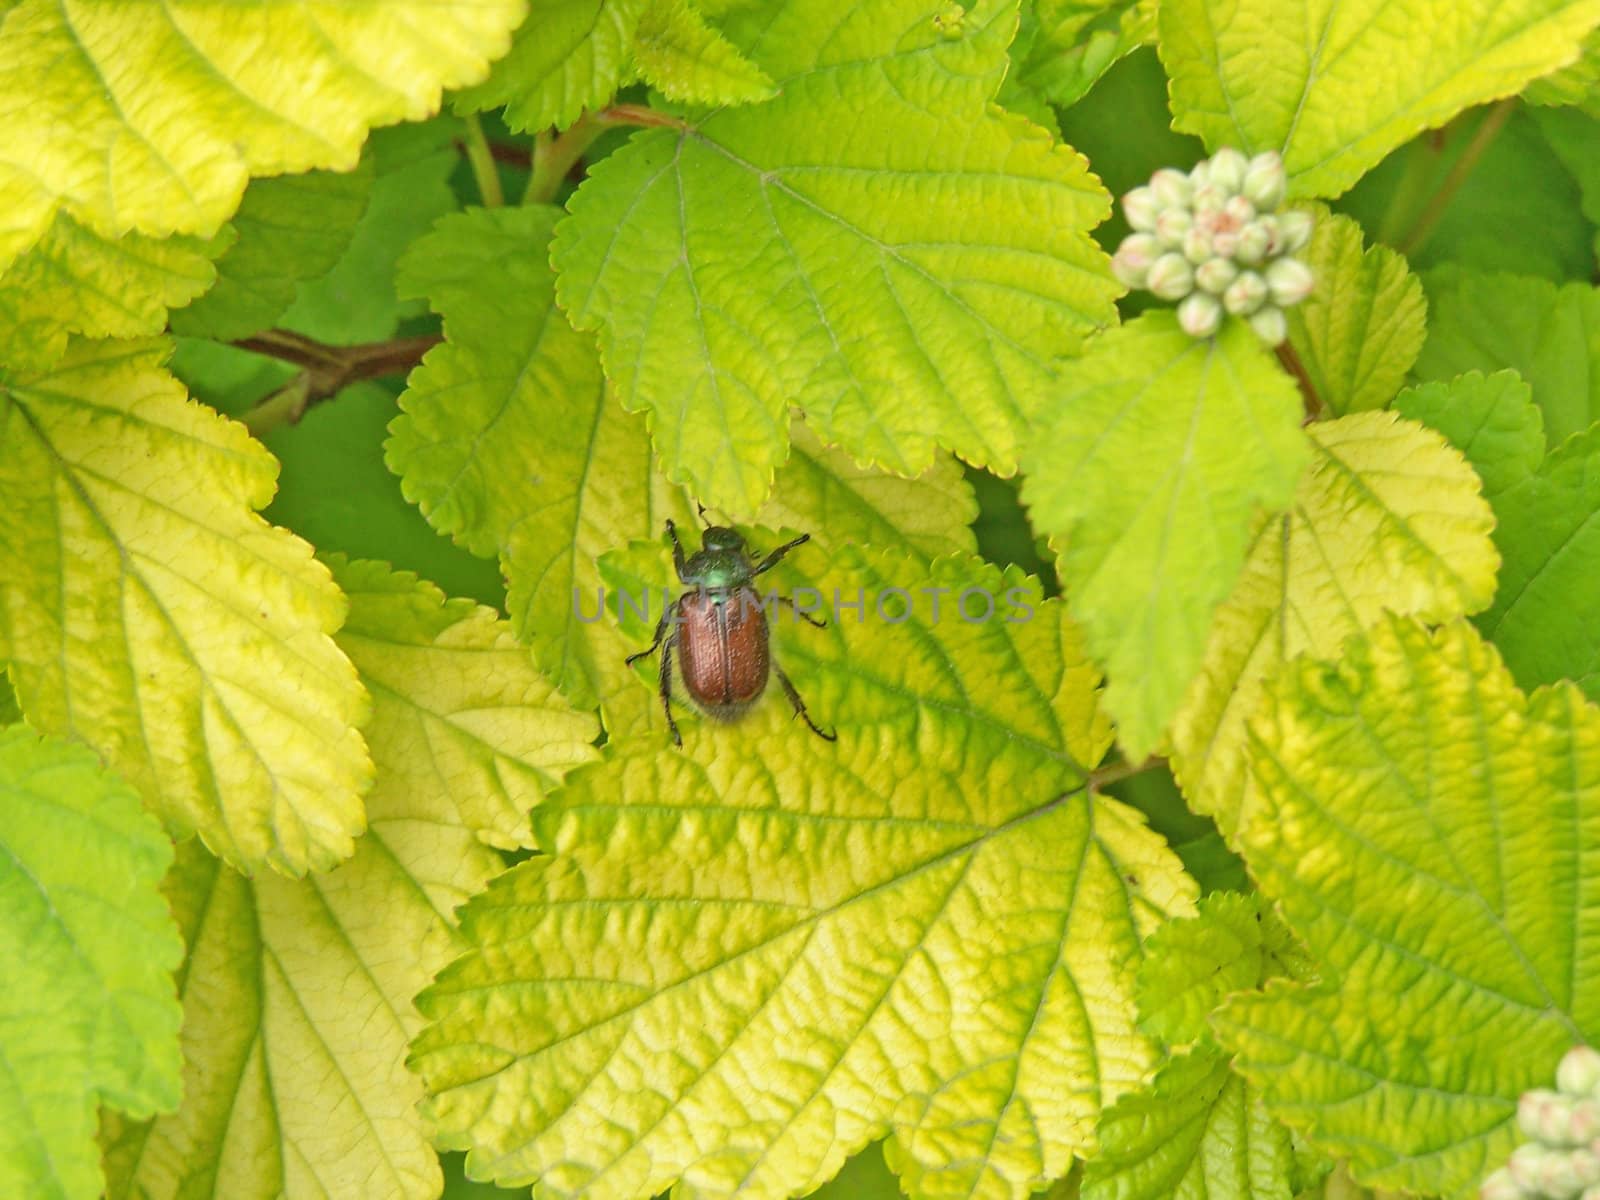 Close up of the bug sitting on the hawtorn leaves.